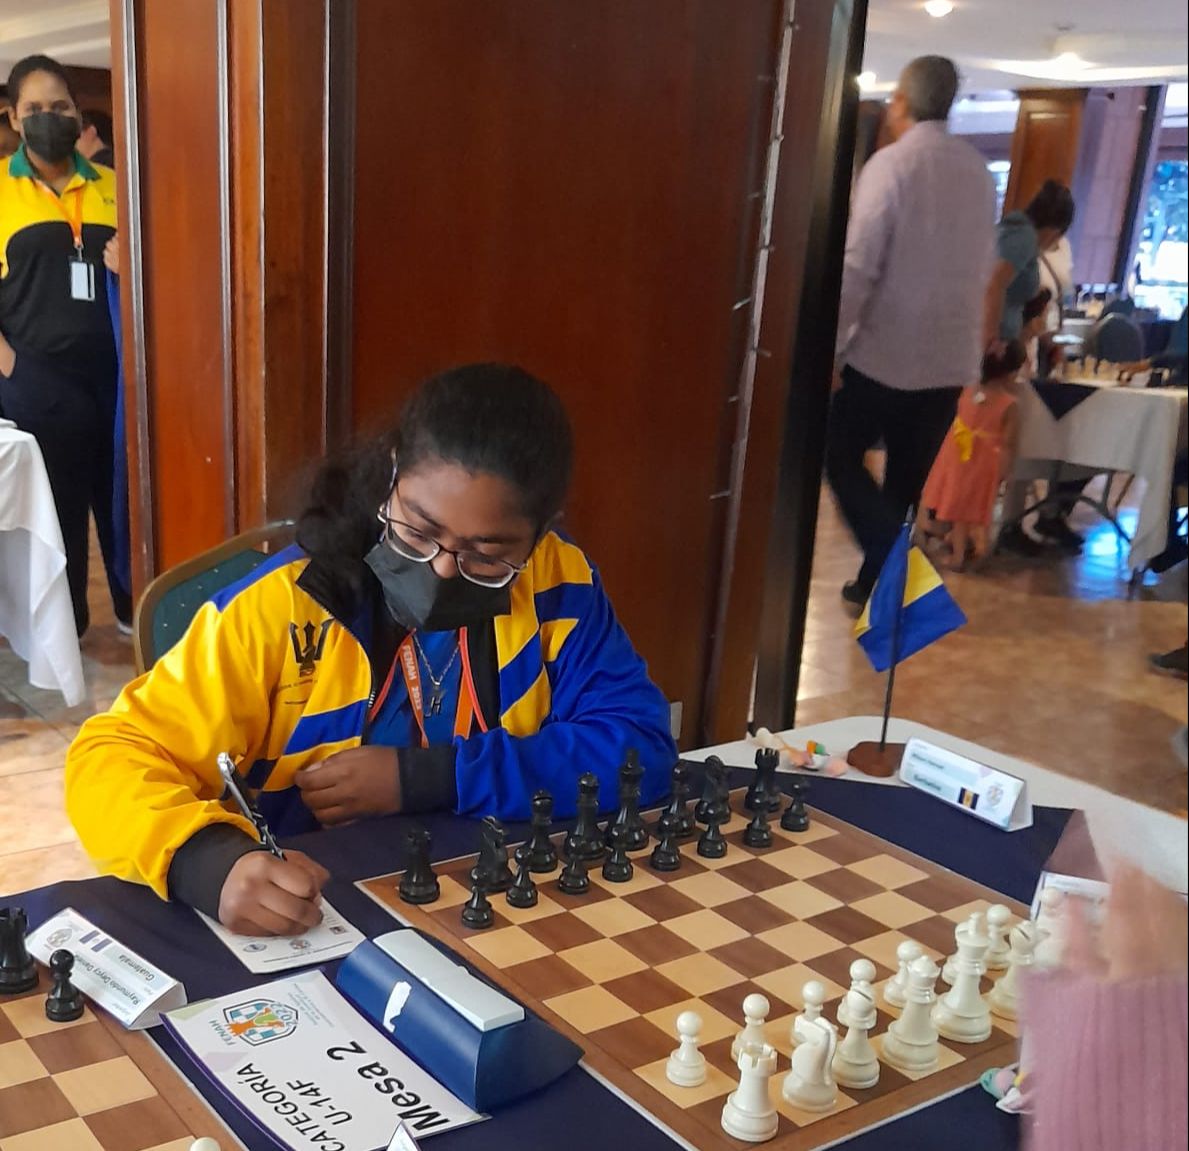 Lynch leads 2023 VEXX chess event, while Wilson battles in the region -  Barbados Chess Federation